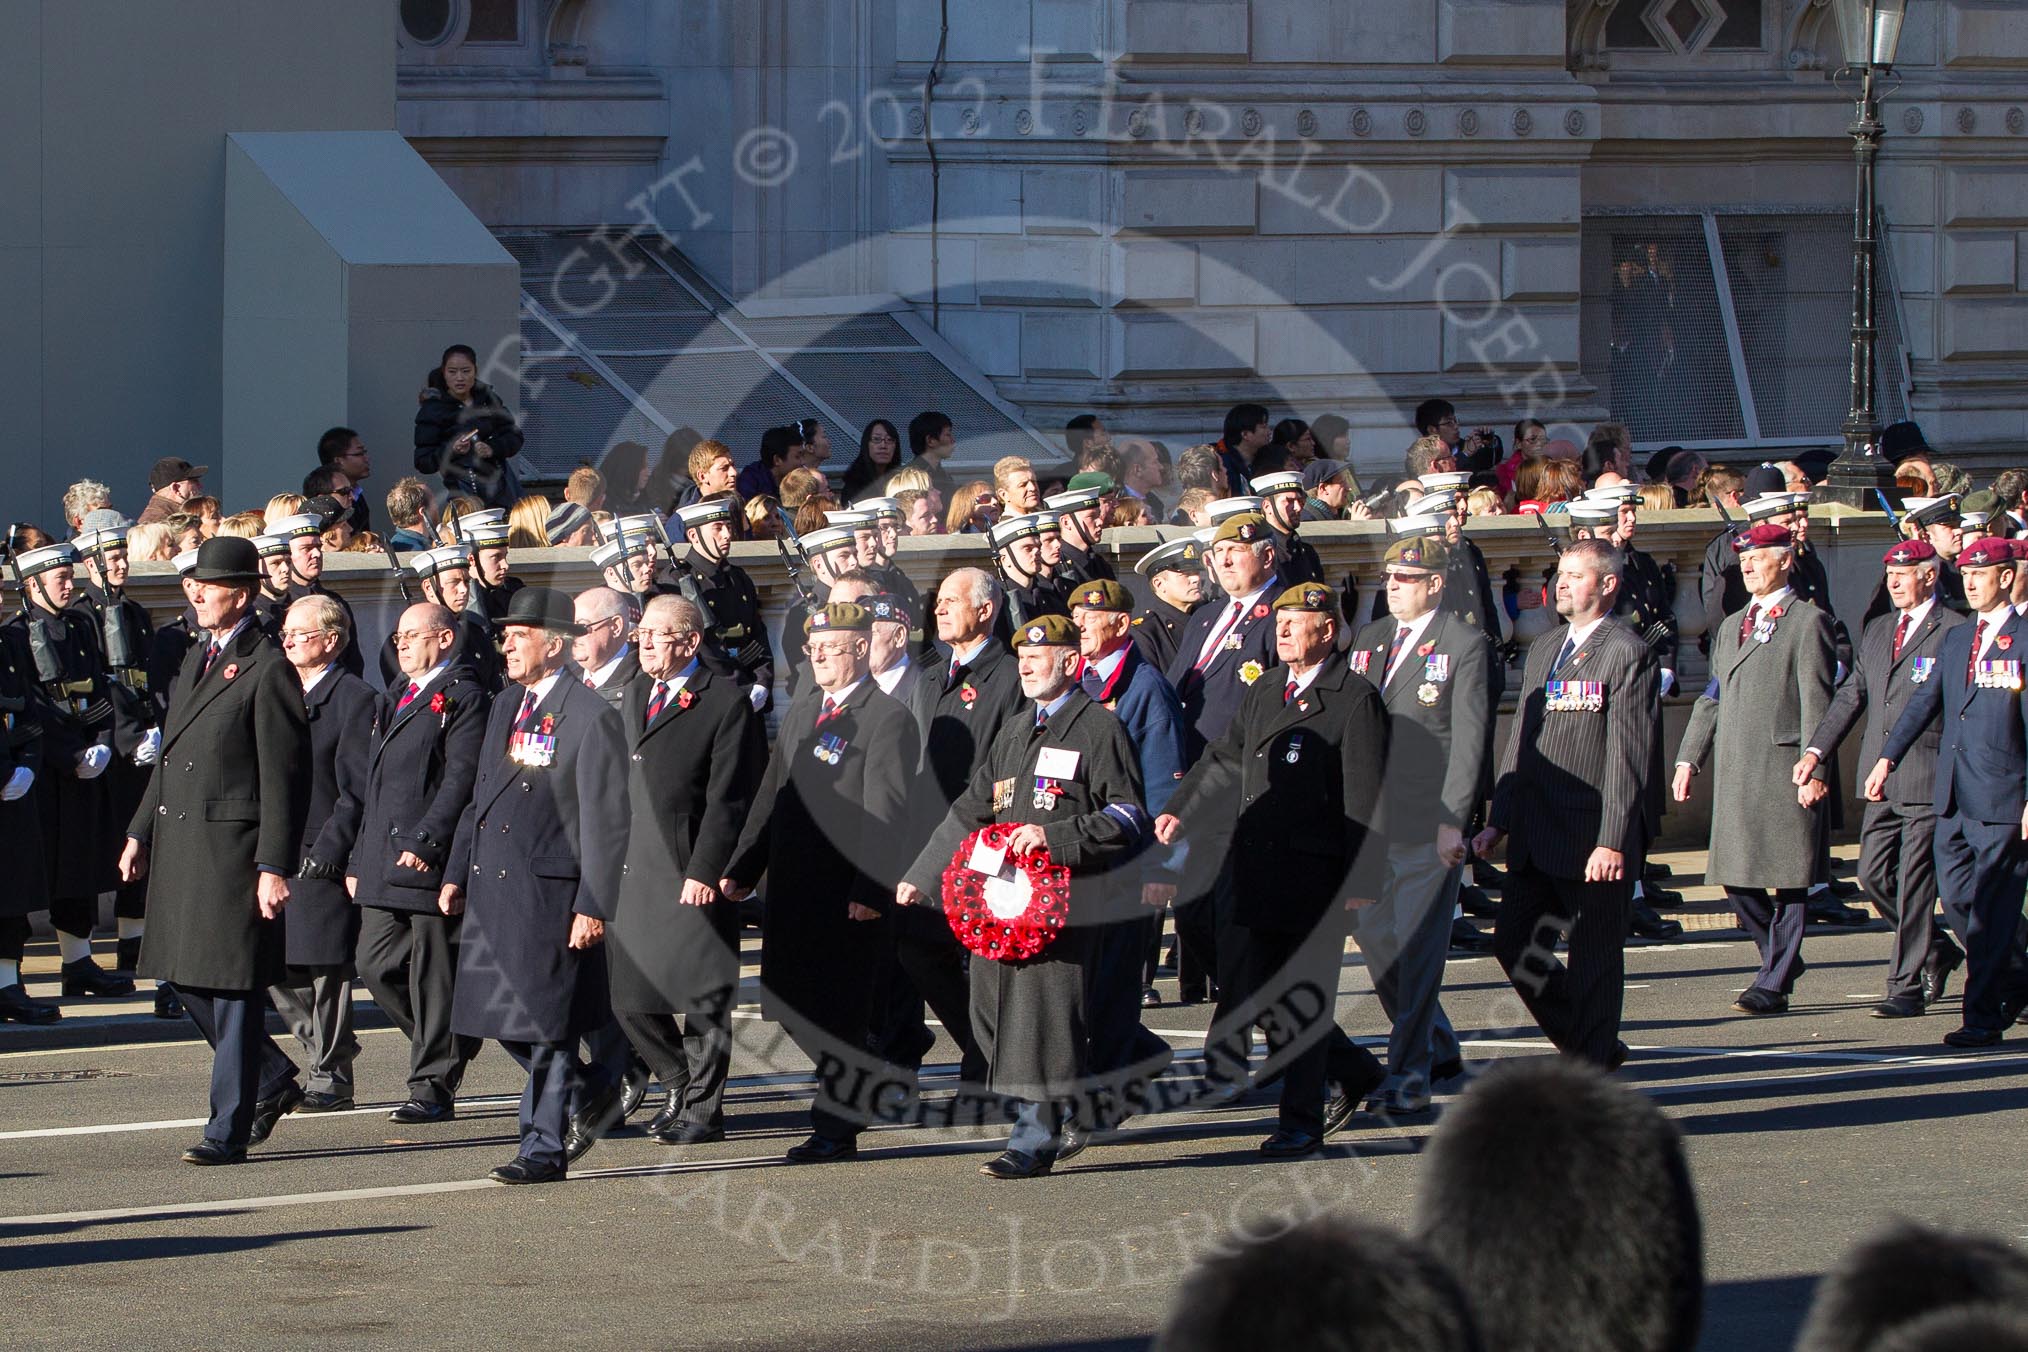 Remembrance Sunday 2012 Cenotaph March Past: Group  A28 - Scots Guards Association..
Whitehall, Cenotaph,
London SW1,

United Kingdom,
on 11 November 2012 at 11:52, image #752